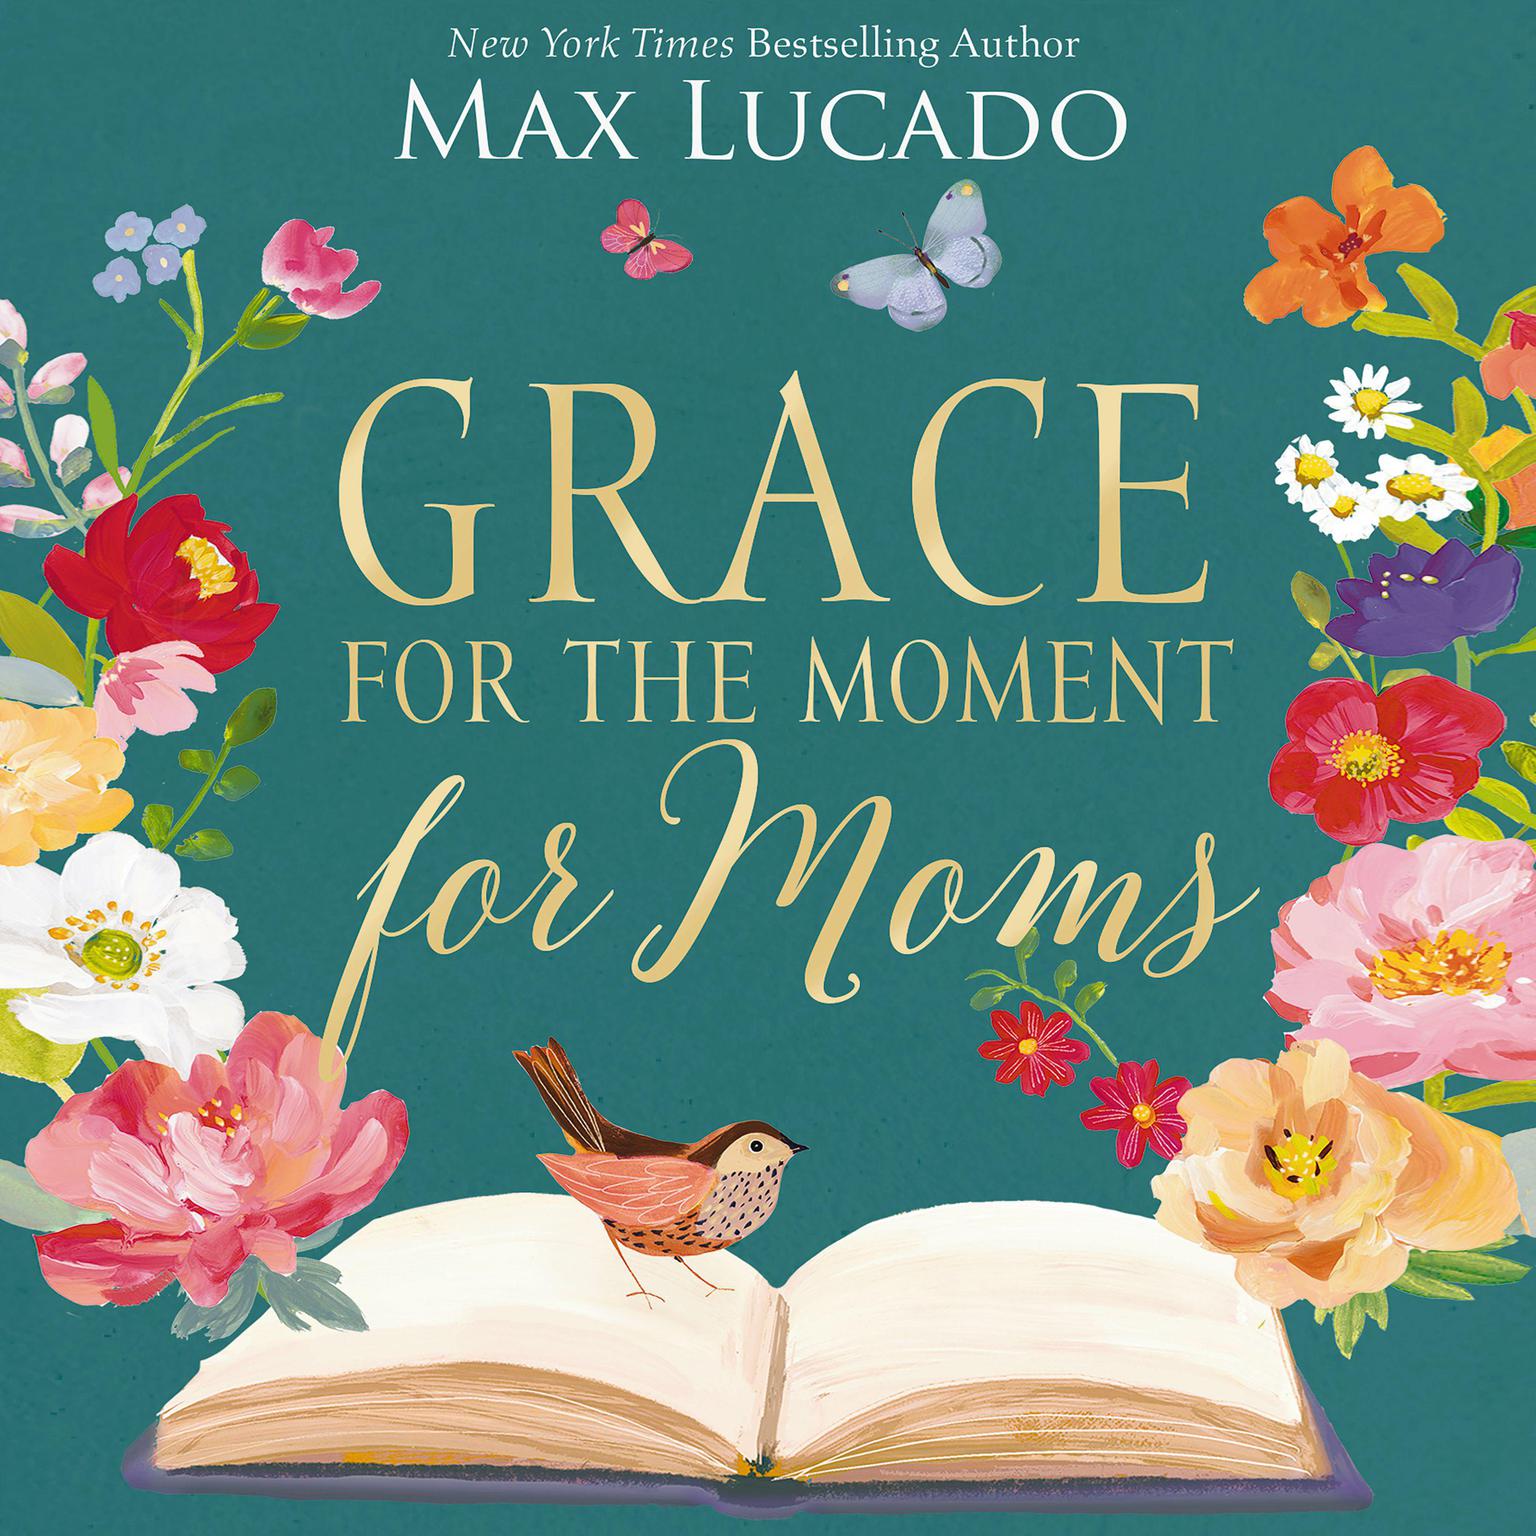 Grace for the Moment for Moms: Inspirational Thoughts of Encouragement and Appreciation for Moms (A 50-Day Devotional) Audiobook, by Max Lucado